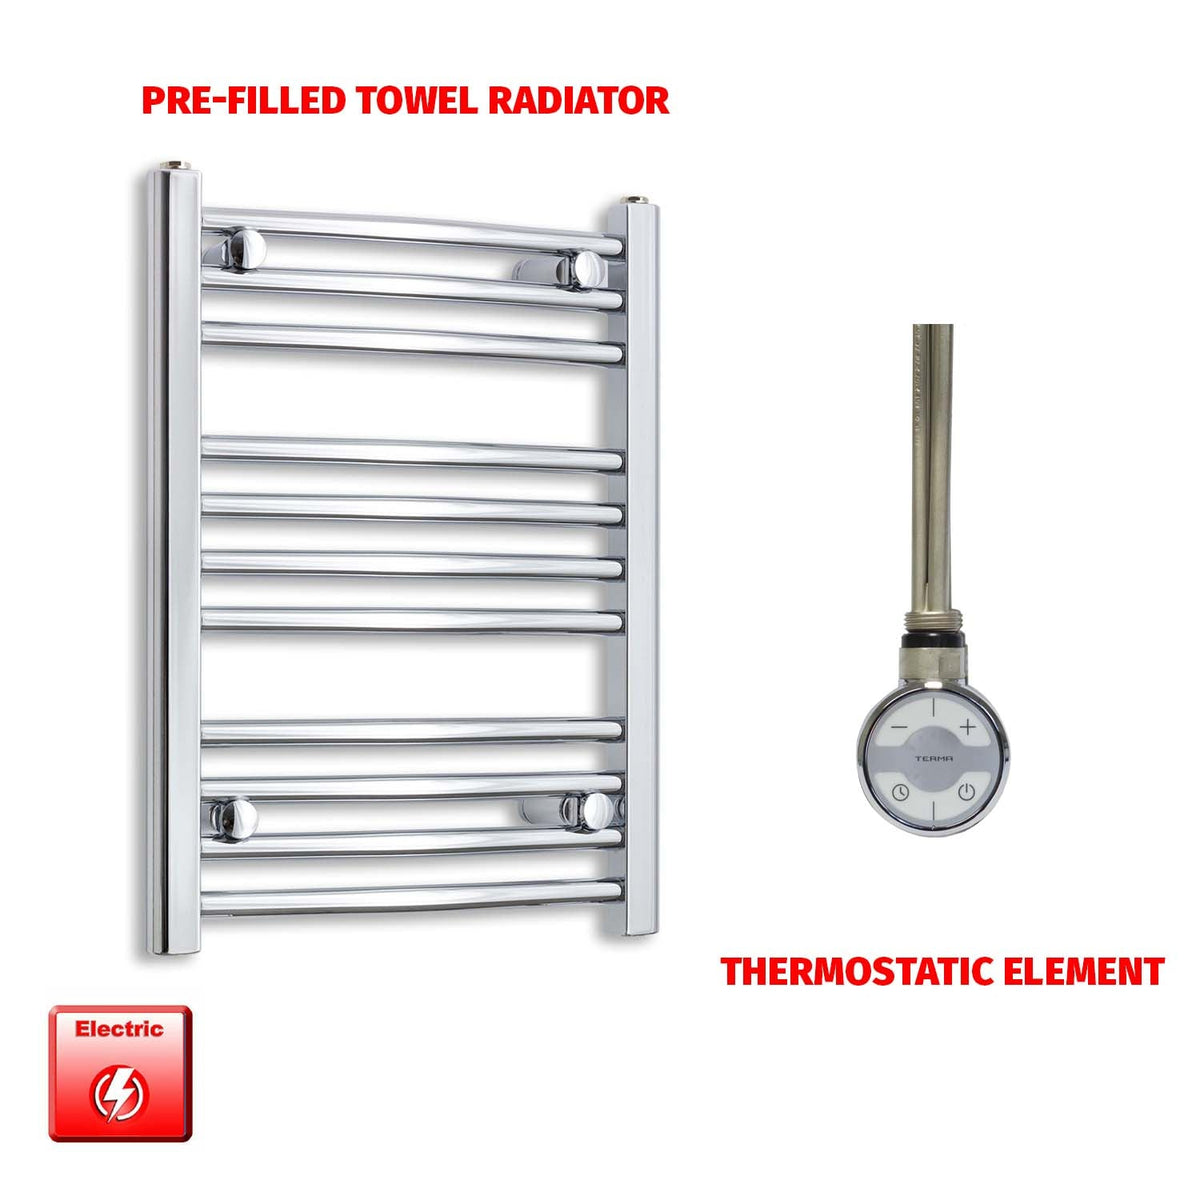 600 x 450 Pre-Filled Electric Heated Towel Radiator Straight Chrome MOA Thermostatic element no timer